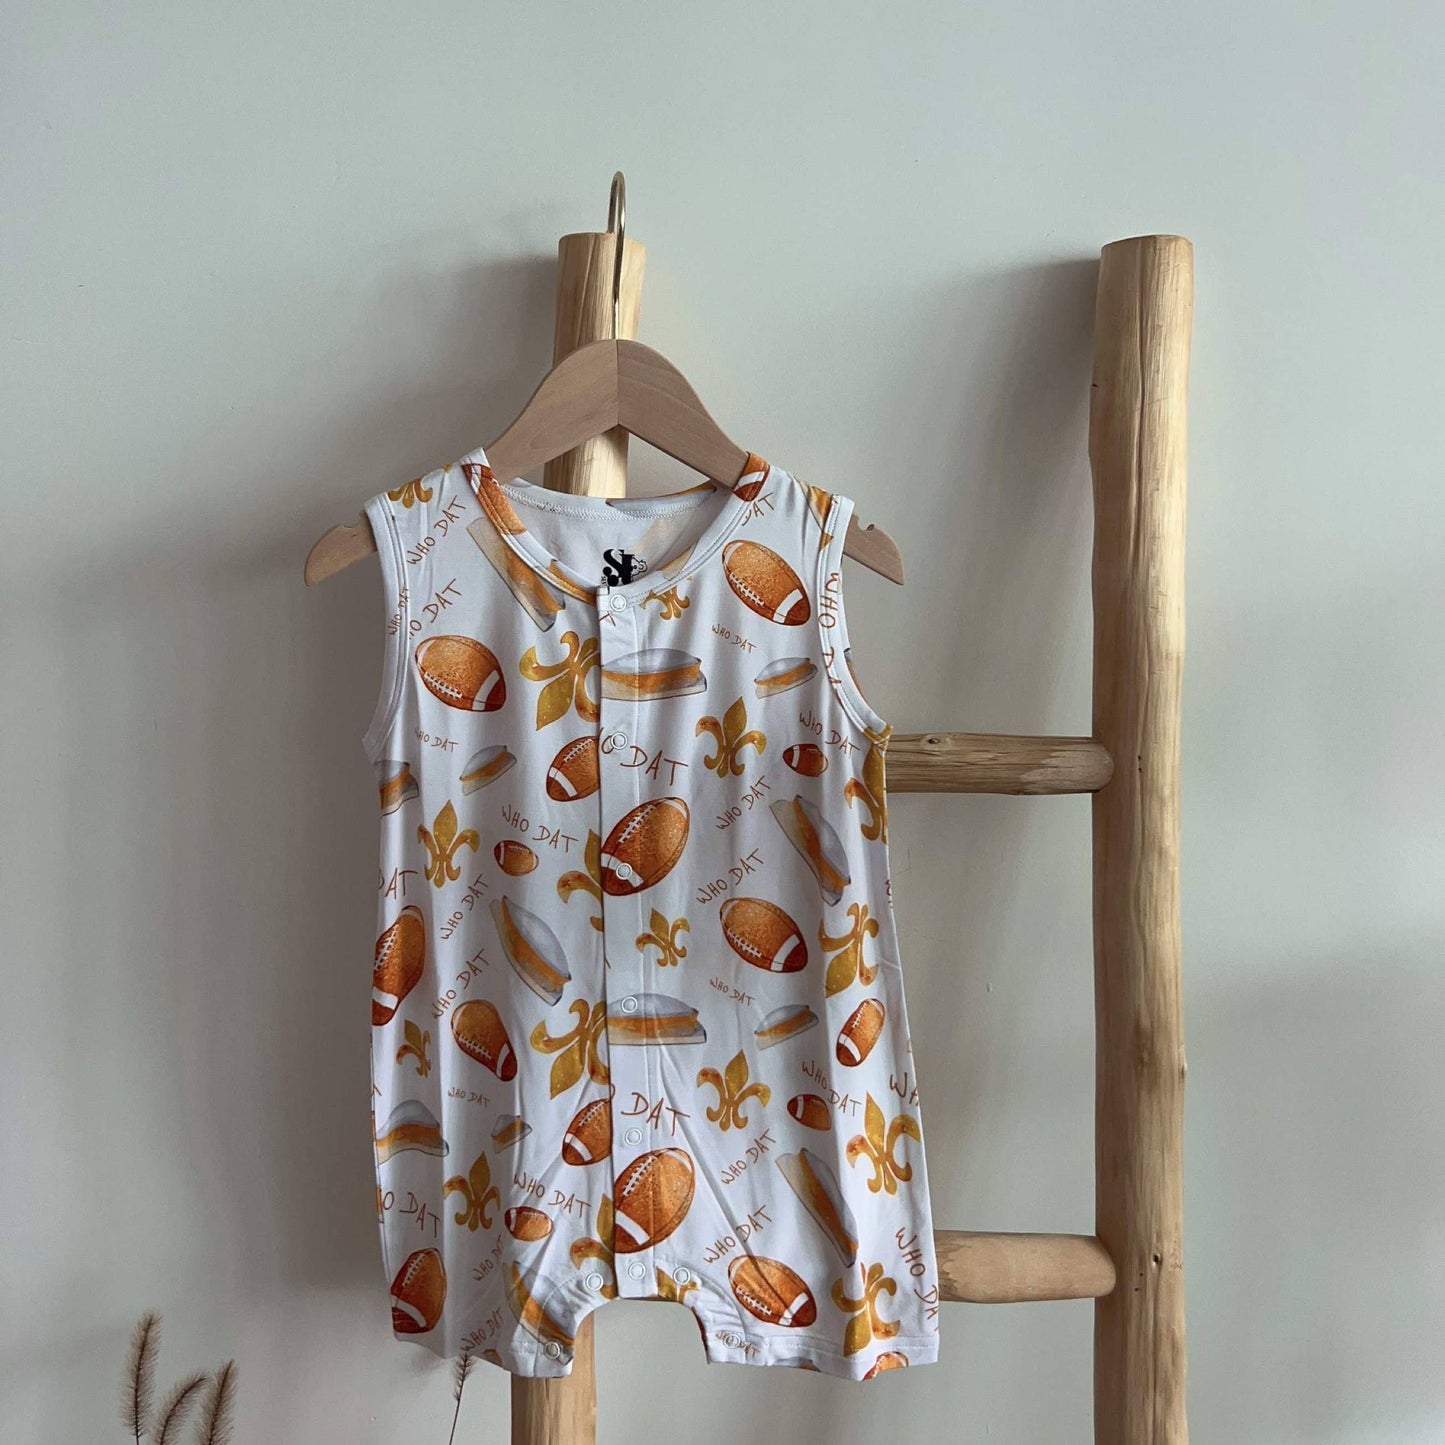 A child's Who Dat Football Bamboo Romper, made by SeersuckerJOEY LLC, hanging on a wooden ladder.